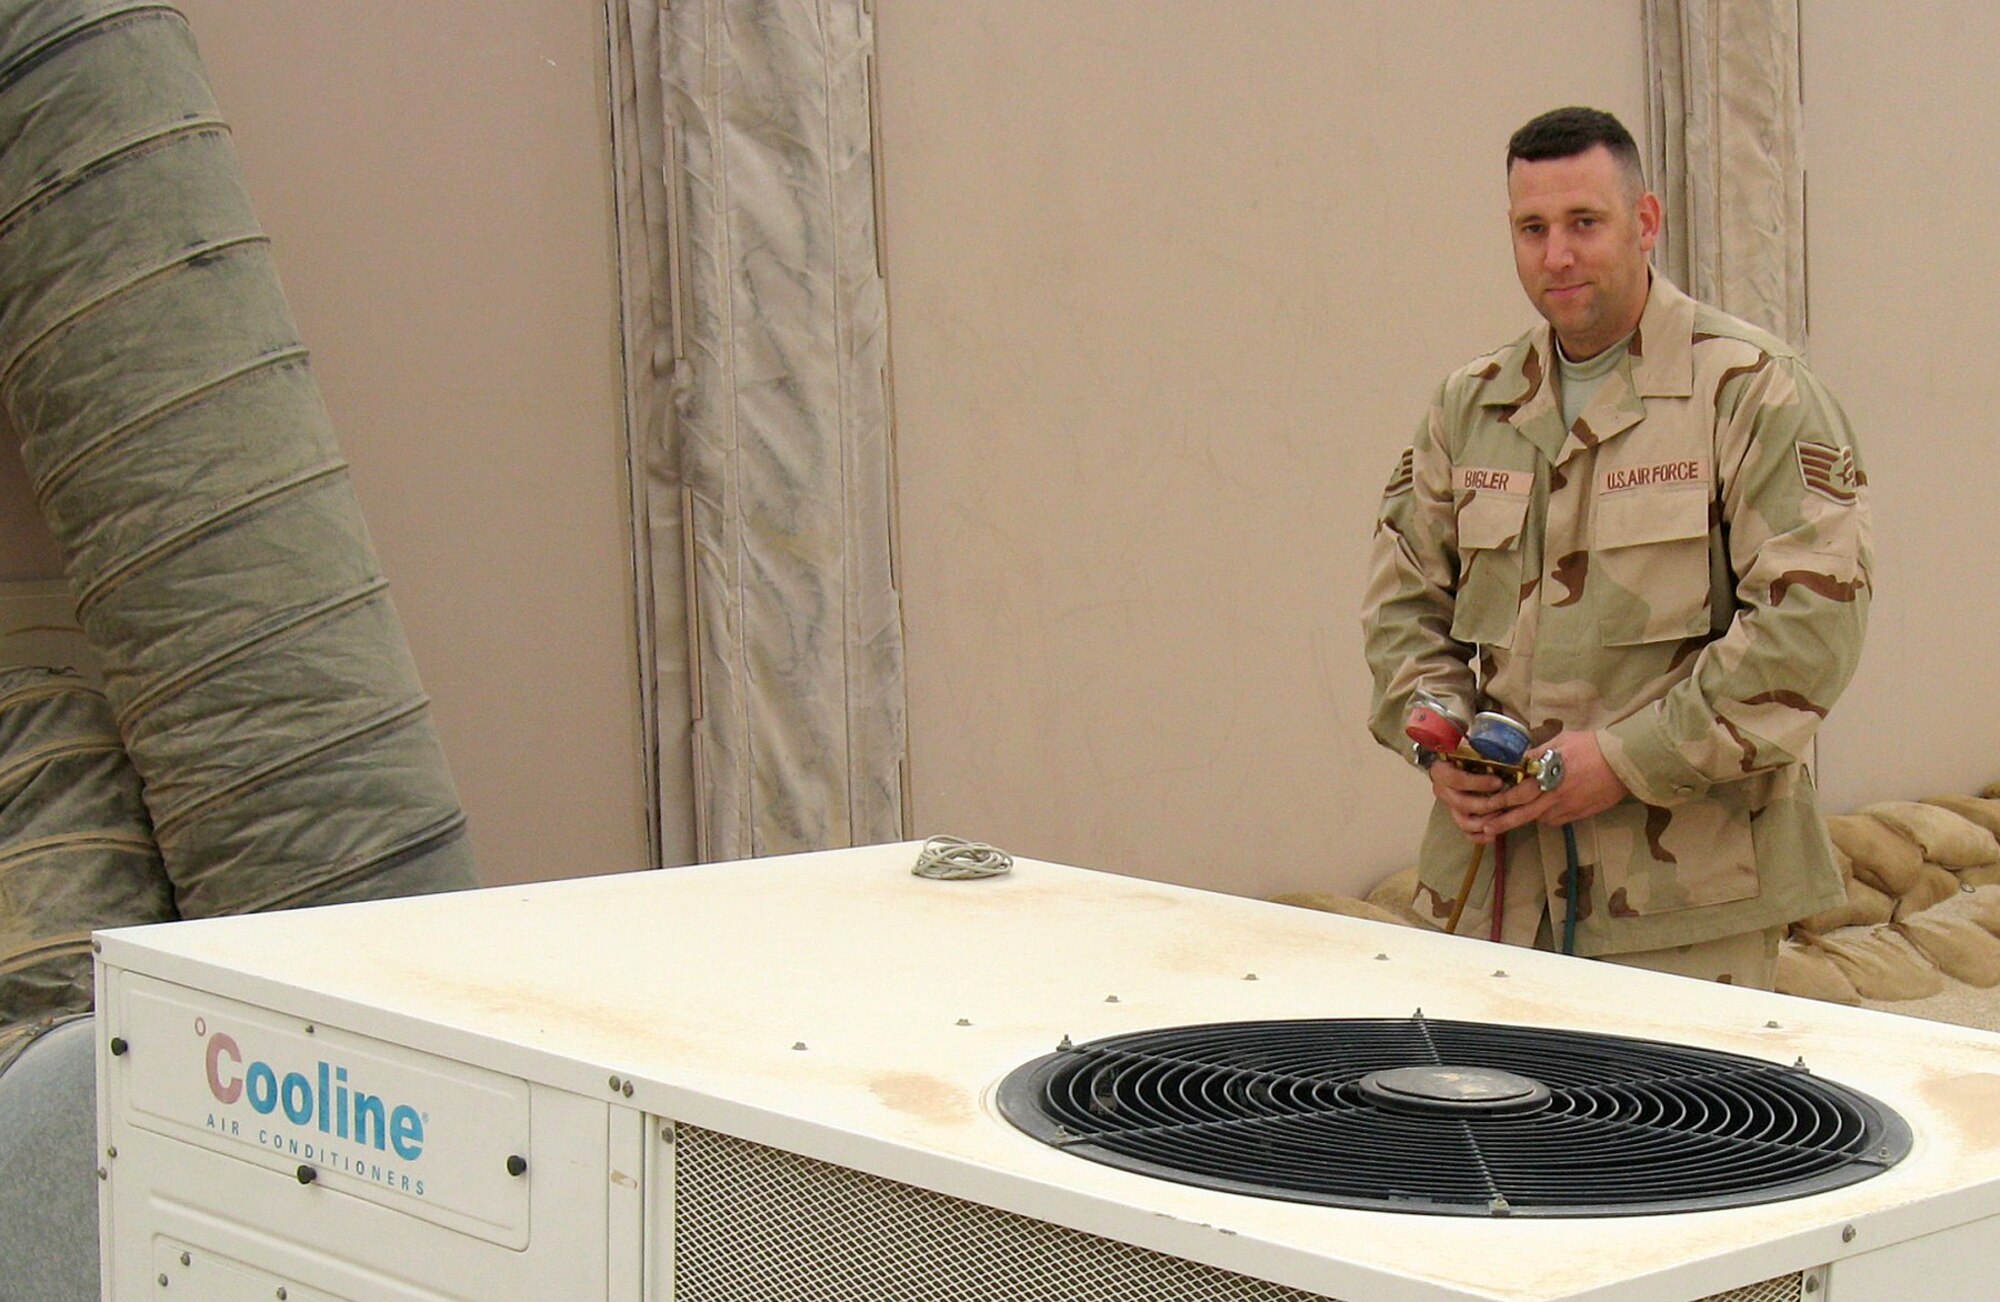 SOUTHWEST ASIA -- Staff Sgt. Shaun Michael Bigler, 386th Expeditionary Civil Engineer Squadron Heating Ventilation Air Conditioning technician is deployed from the 110th Fighter Wing at Battle Creek, Mich. (U.S. Air Force courtesy photo)